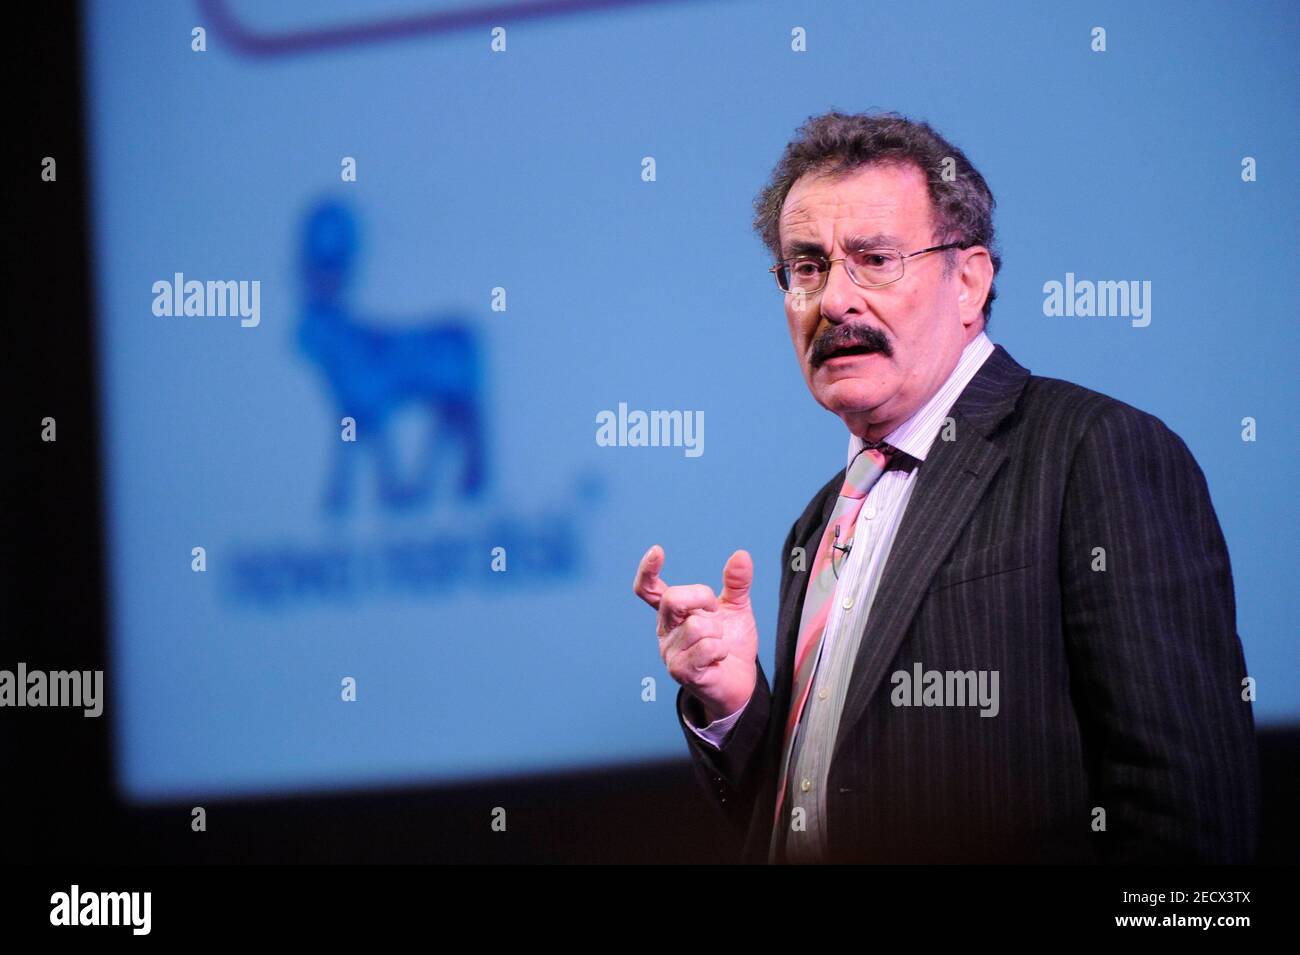 Lord Robert Winston, British professor, medical doctor, scientist, television presenter and Labour Party politician speaking at Diabetes UK Annual Conference 2010, BT Convention Centre, Liverpool Stock Photo